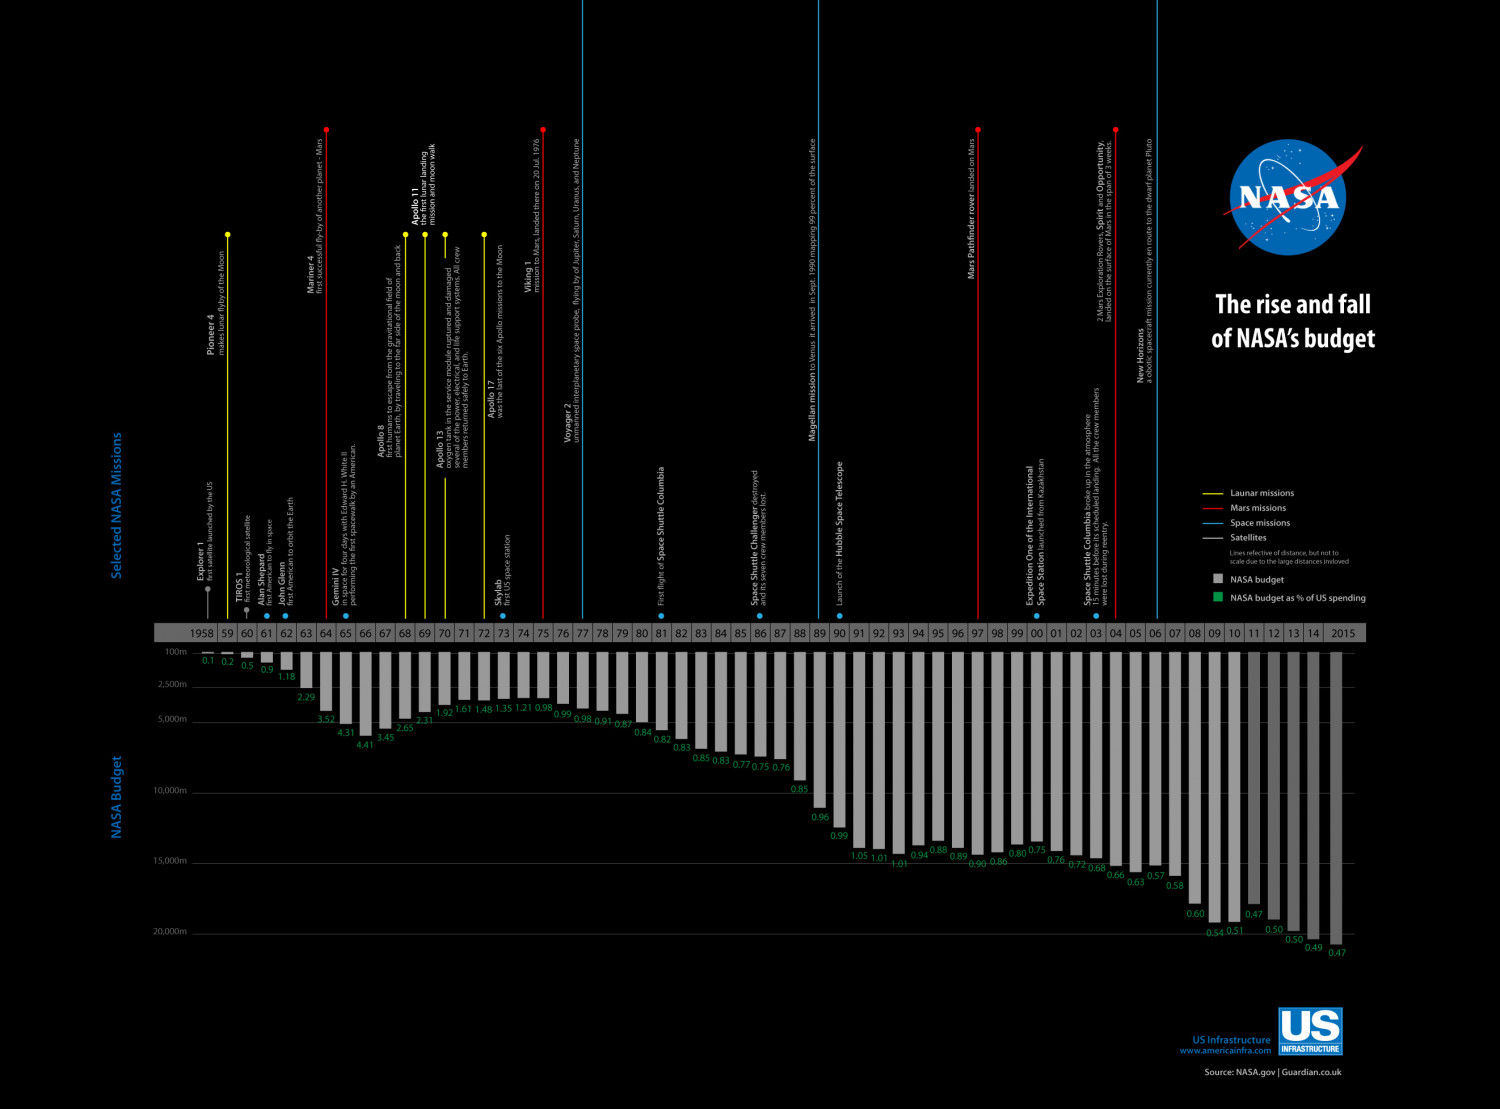 The rise and fall of NASA’s budget Infographic